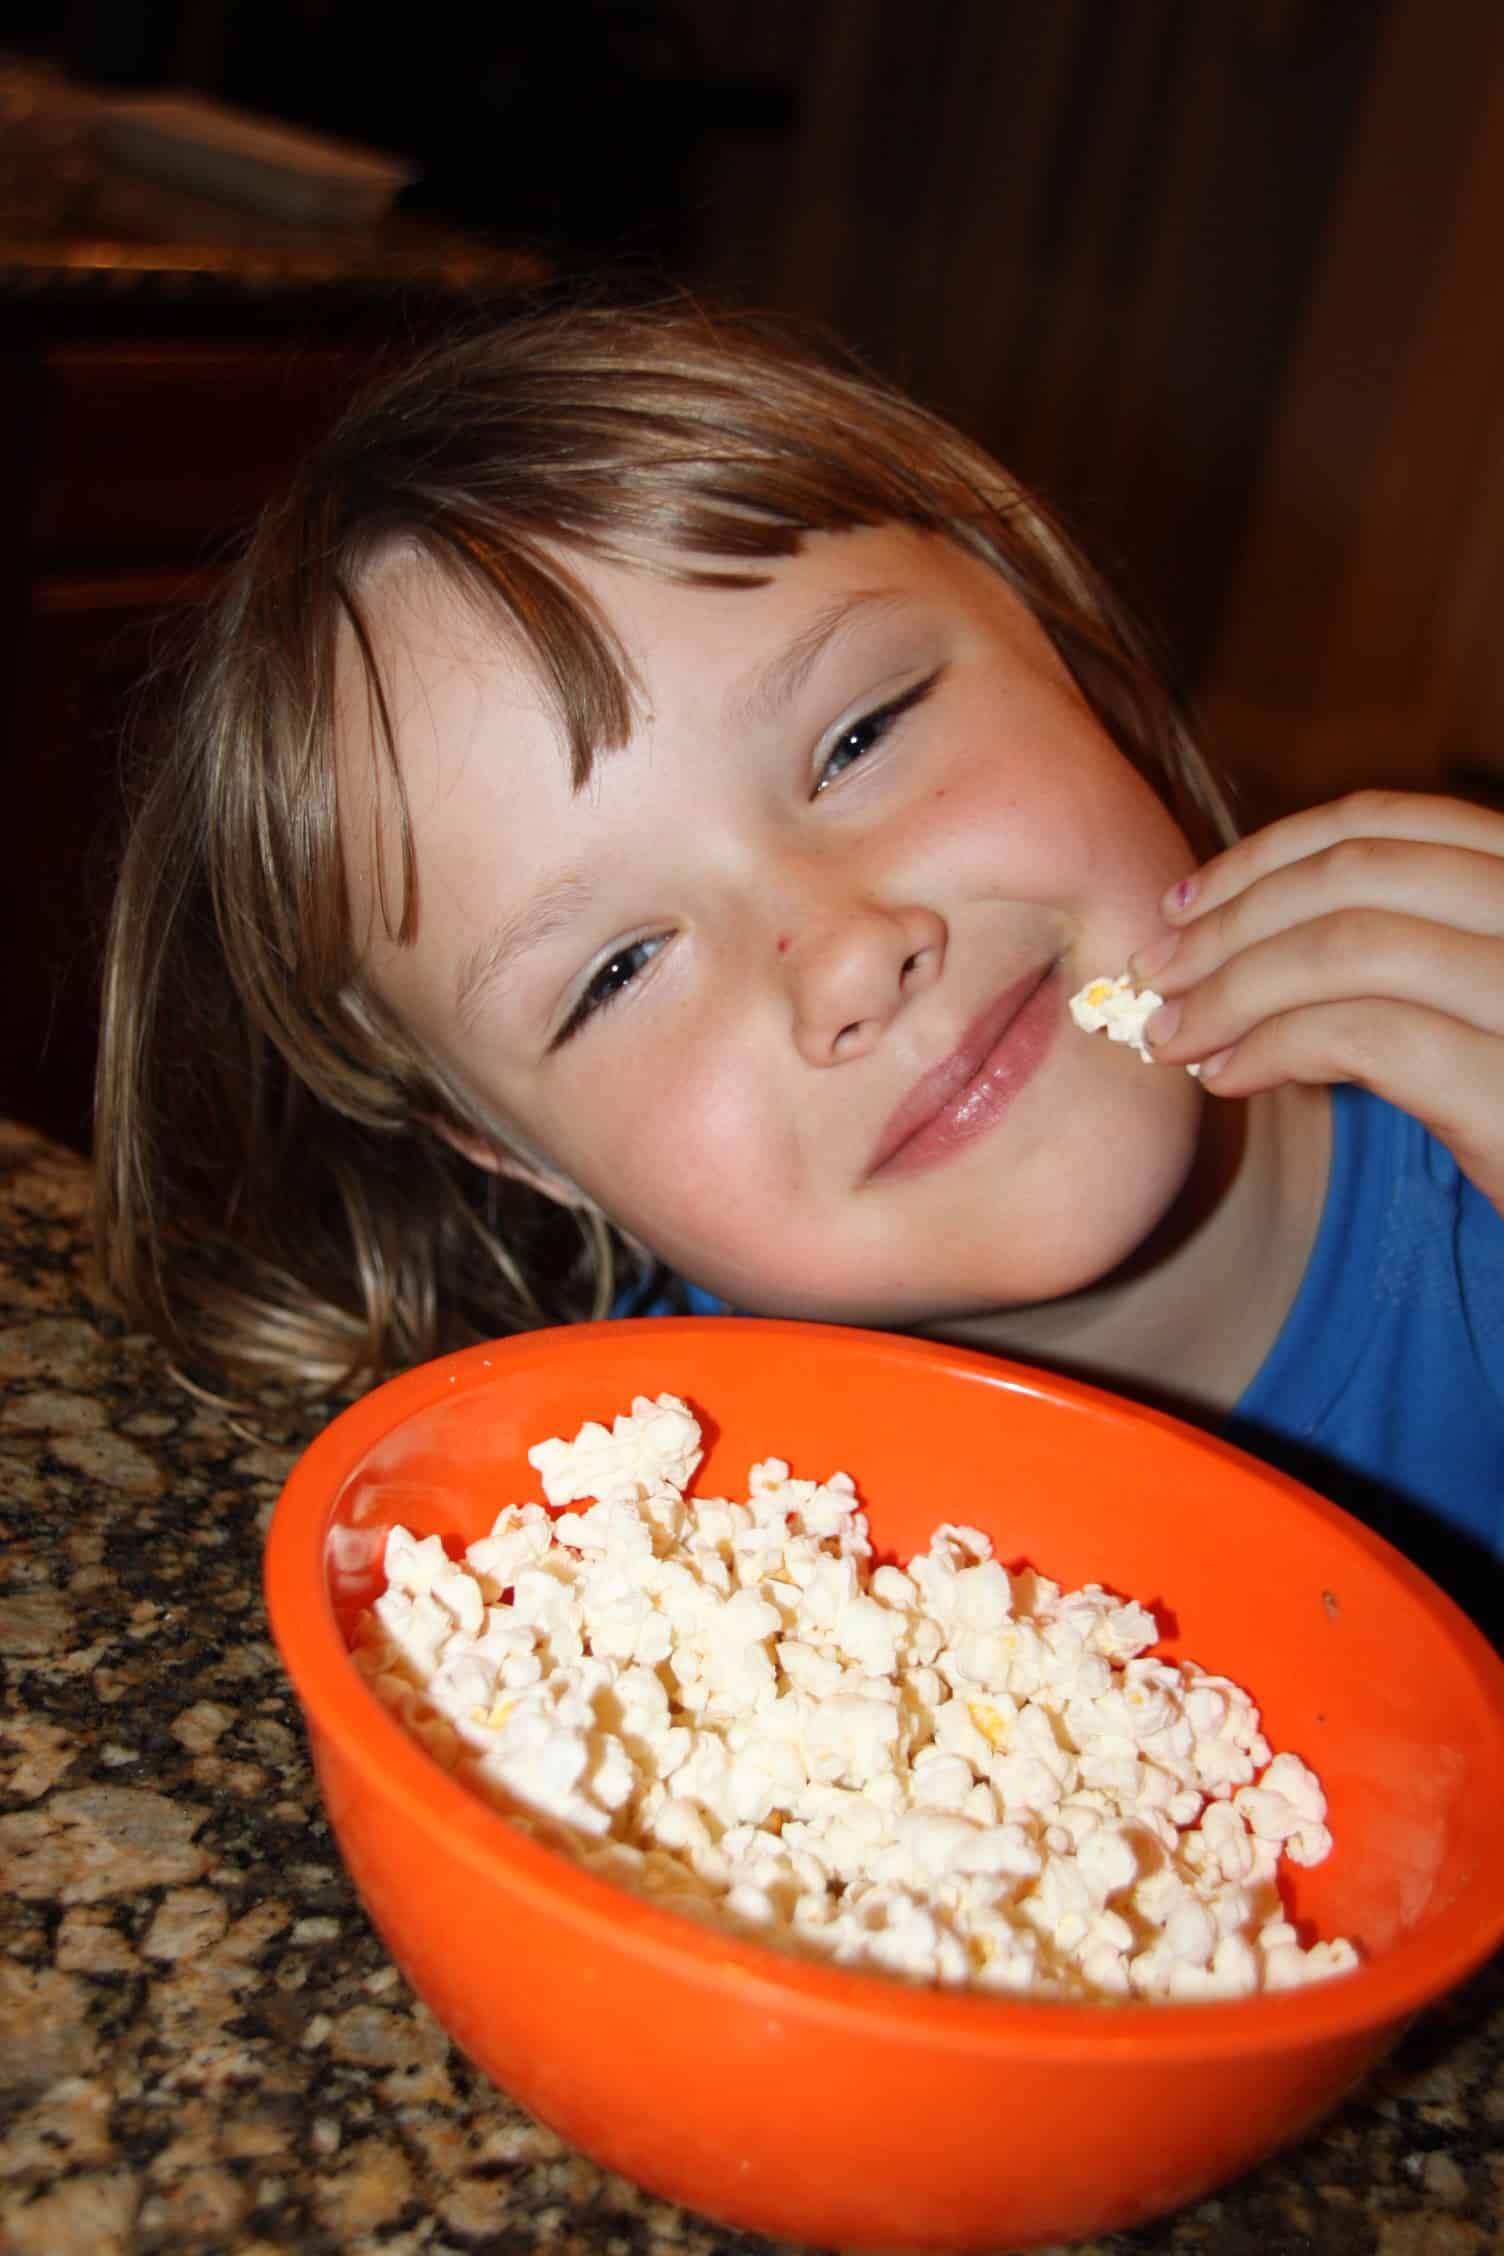 Homemade Microwave Popcorn!  (Movie Theater Secret ingredient included!)